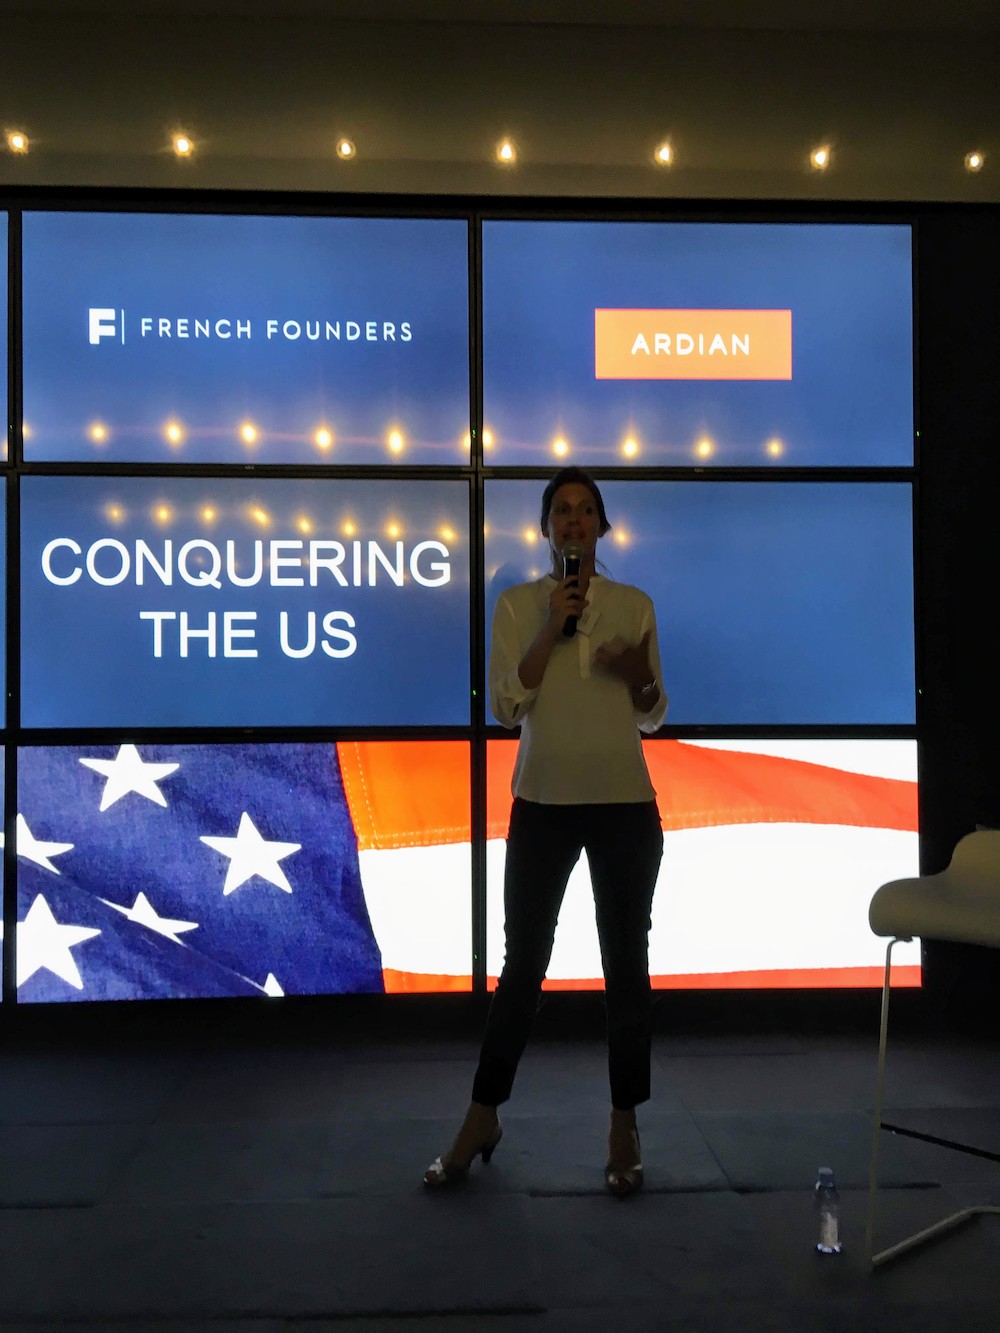 frenchfounders_conquering the us 02